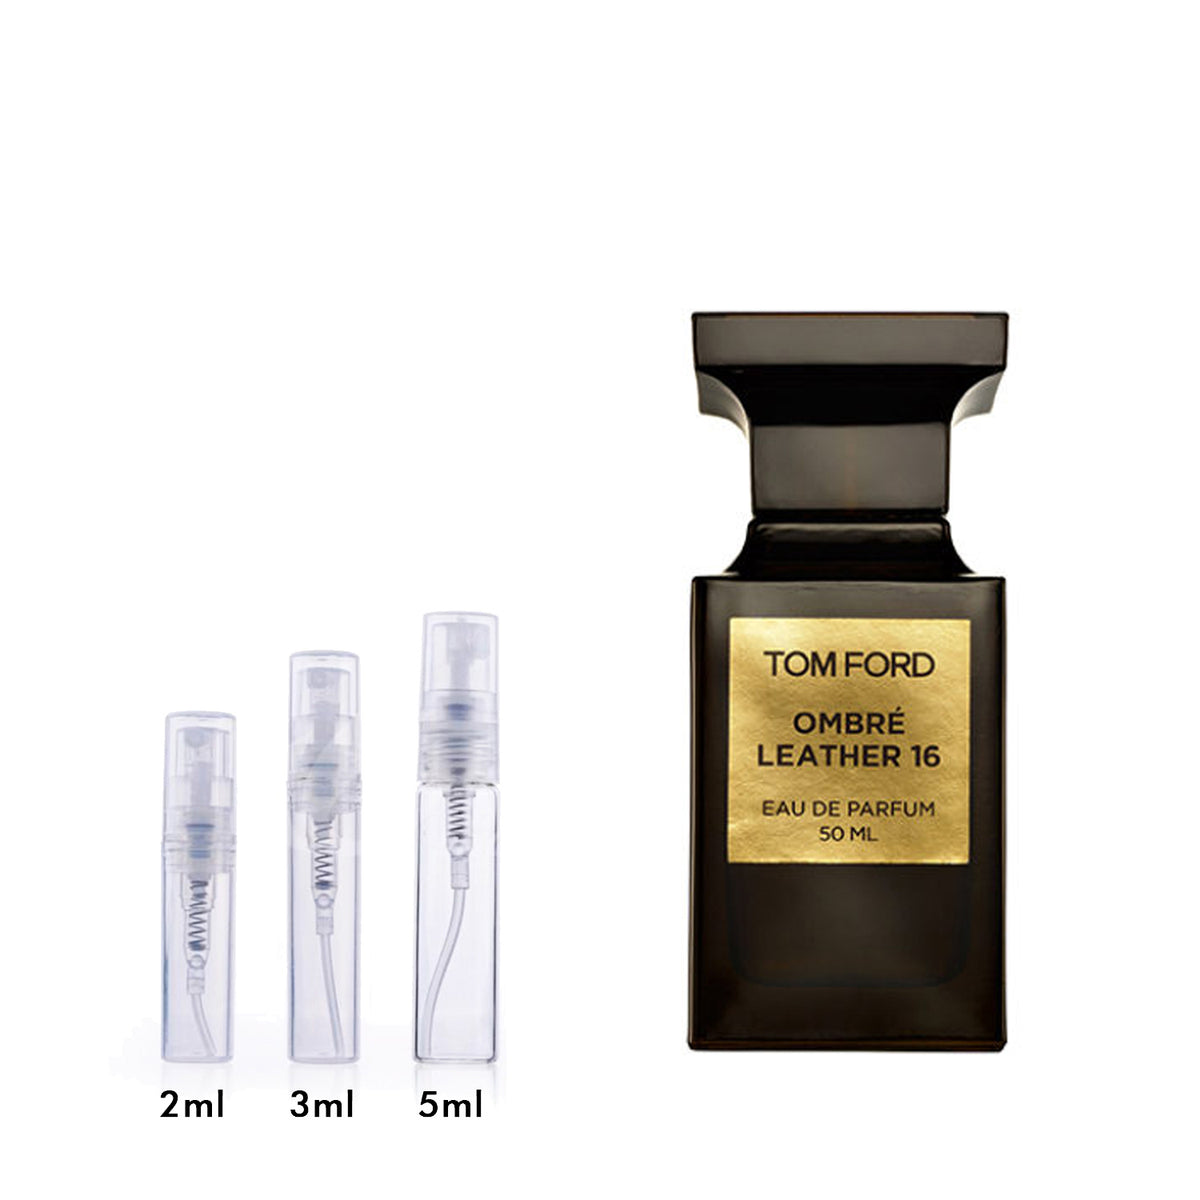 Tom Ford Ombre Leather 16 (+Tuscan Leather) – Kafkaesque